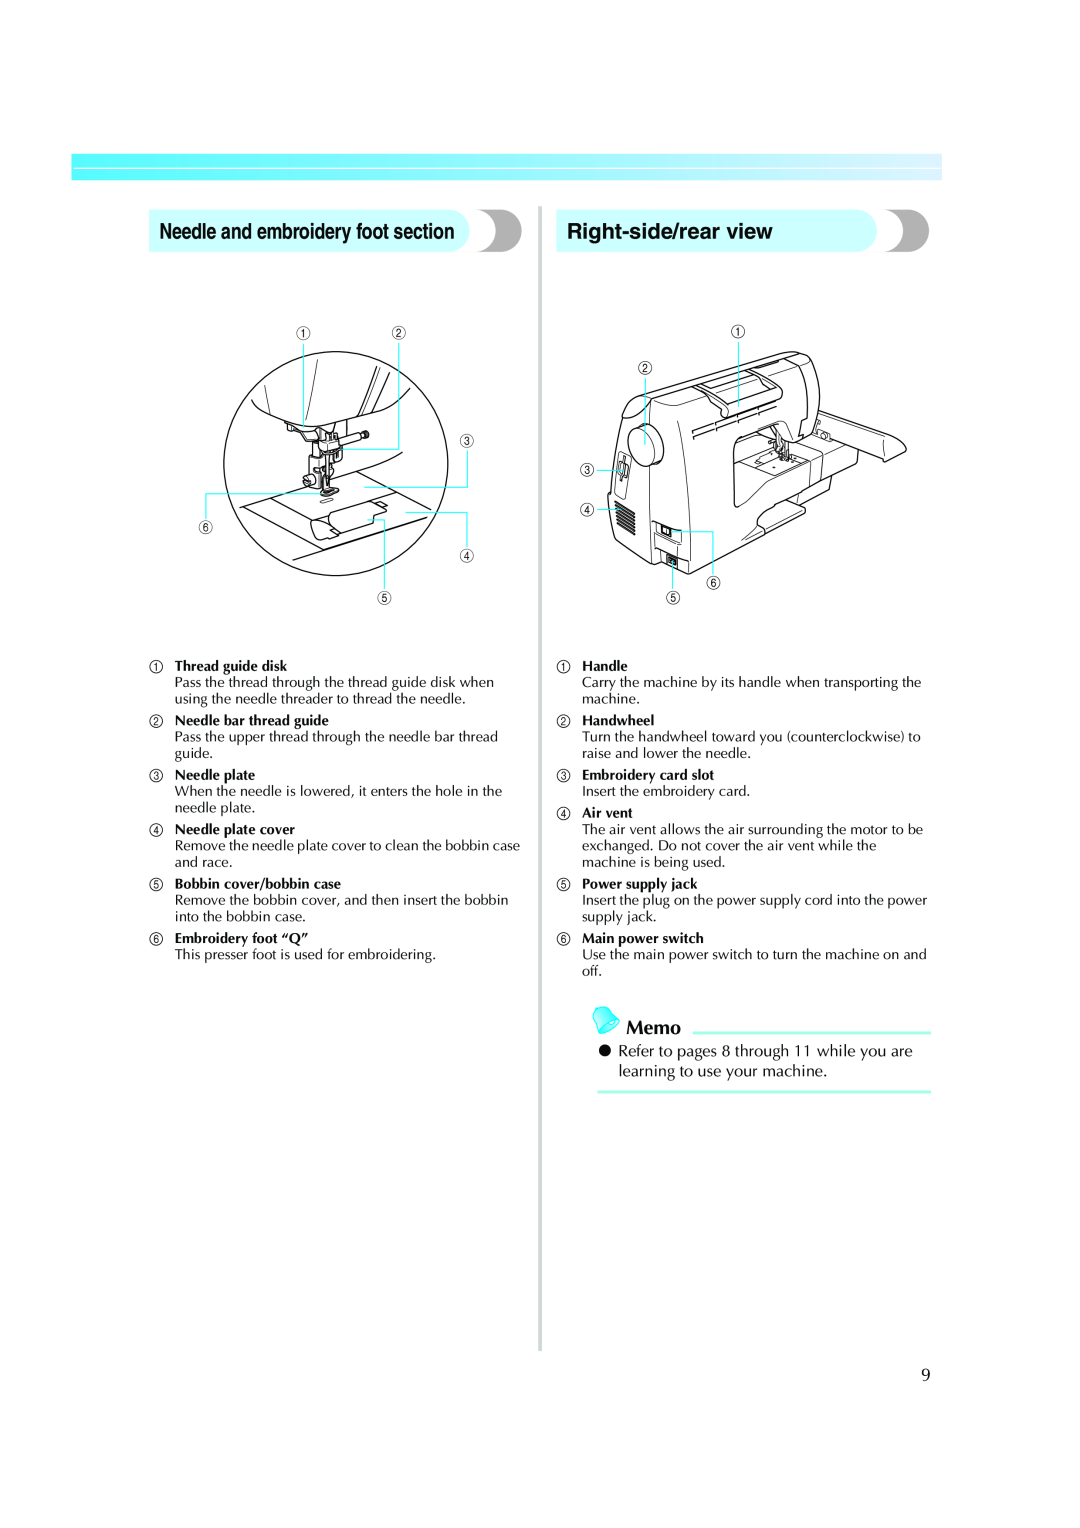 Brother Computerized Embroidery Machine operation manual Needle and embroidery foot section, Right-side/rear view, Memo 